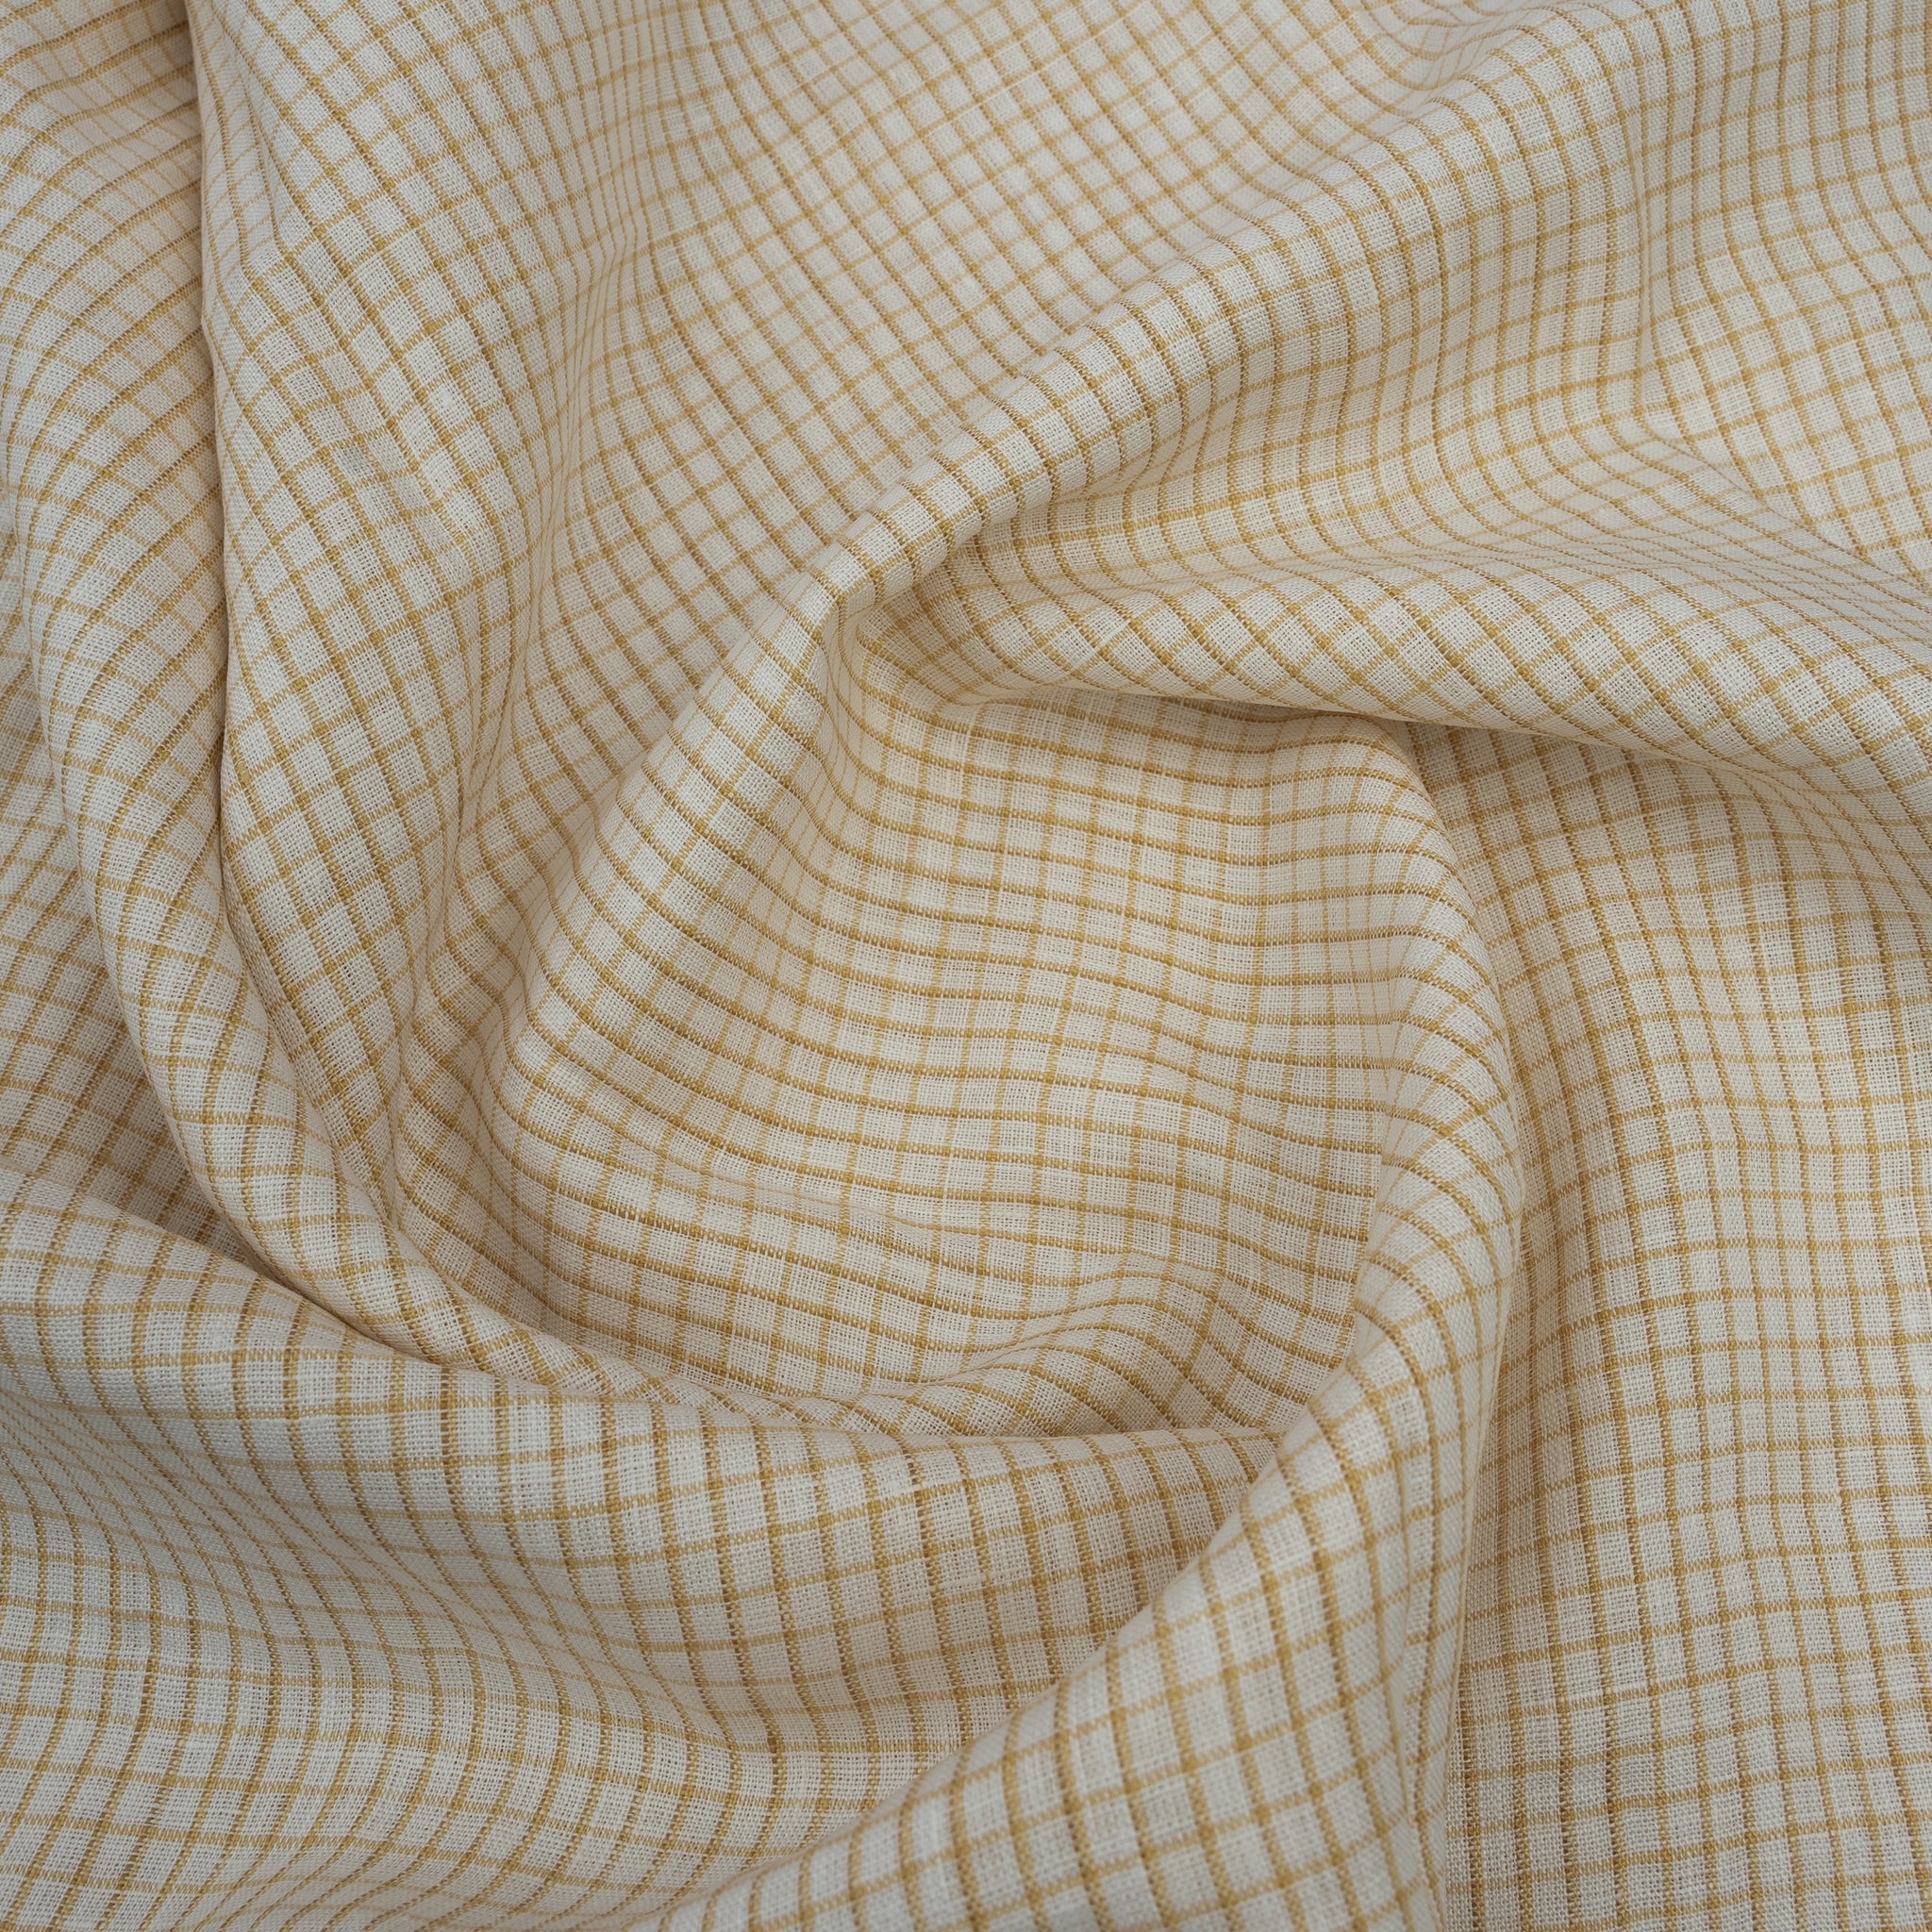 100% Linen, Yarn Dyed, Plain,Orange And White, Men And Women, Unstitched Shirting Or Top Fabric